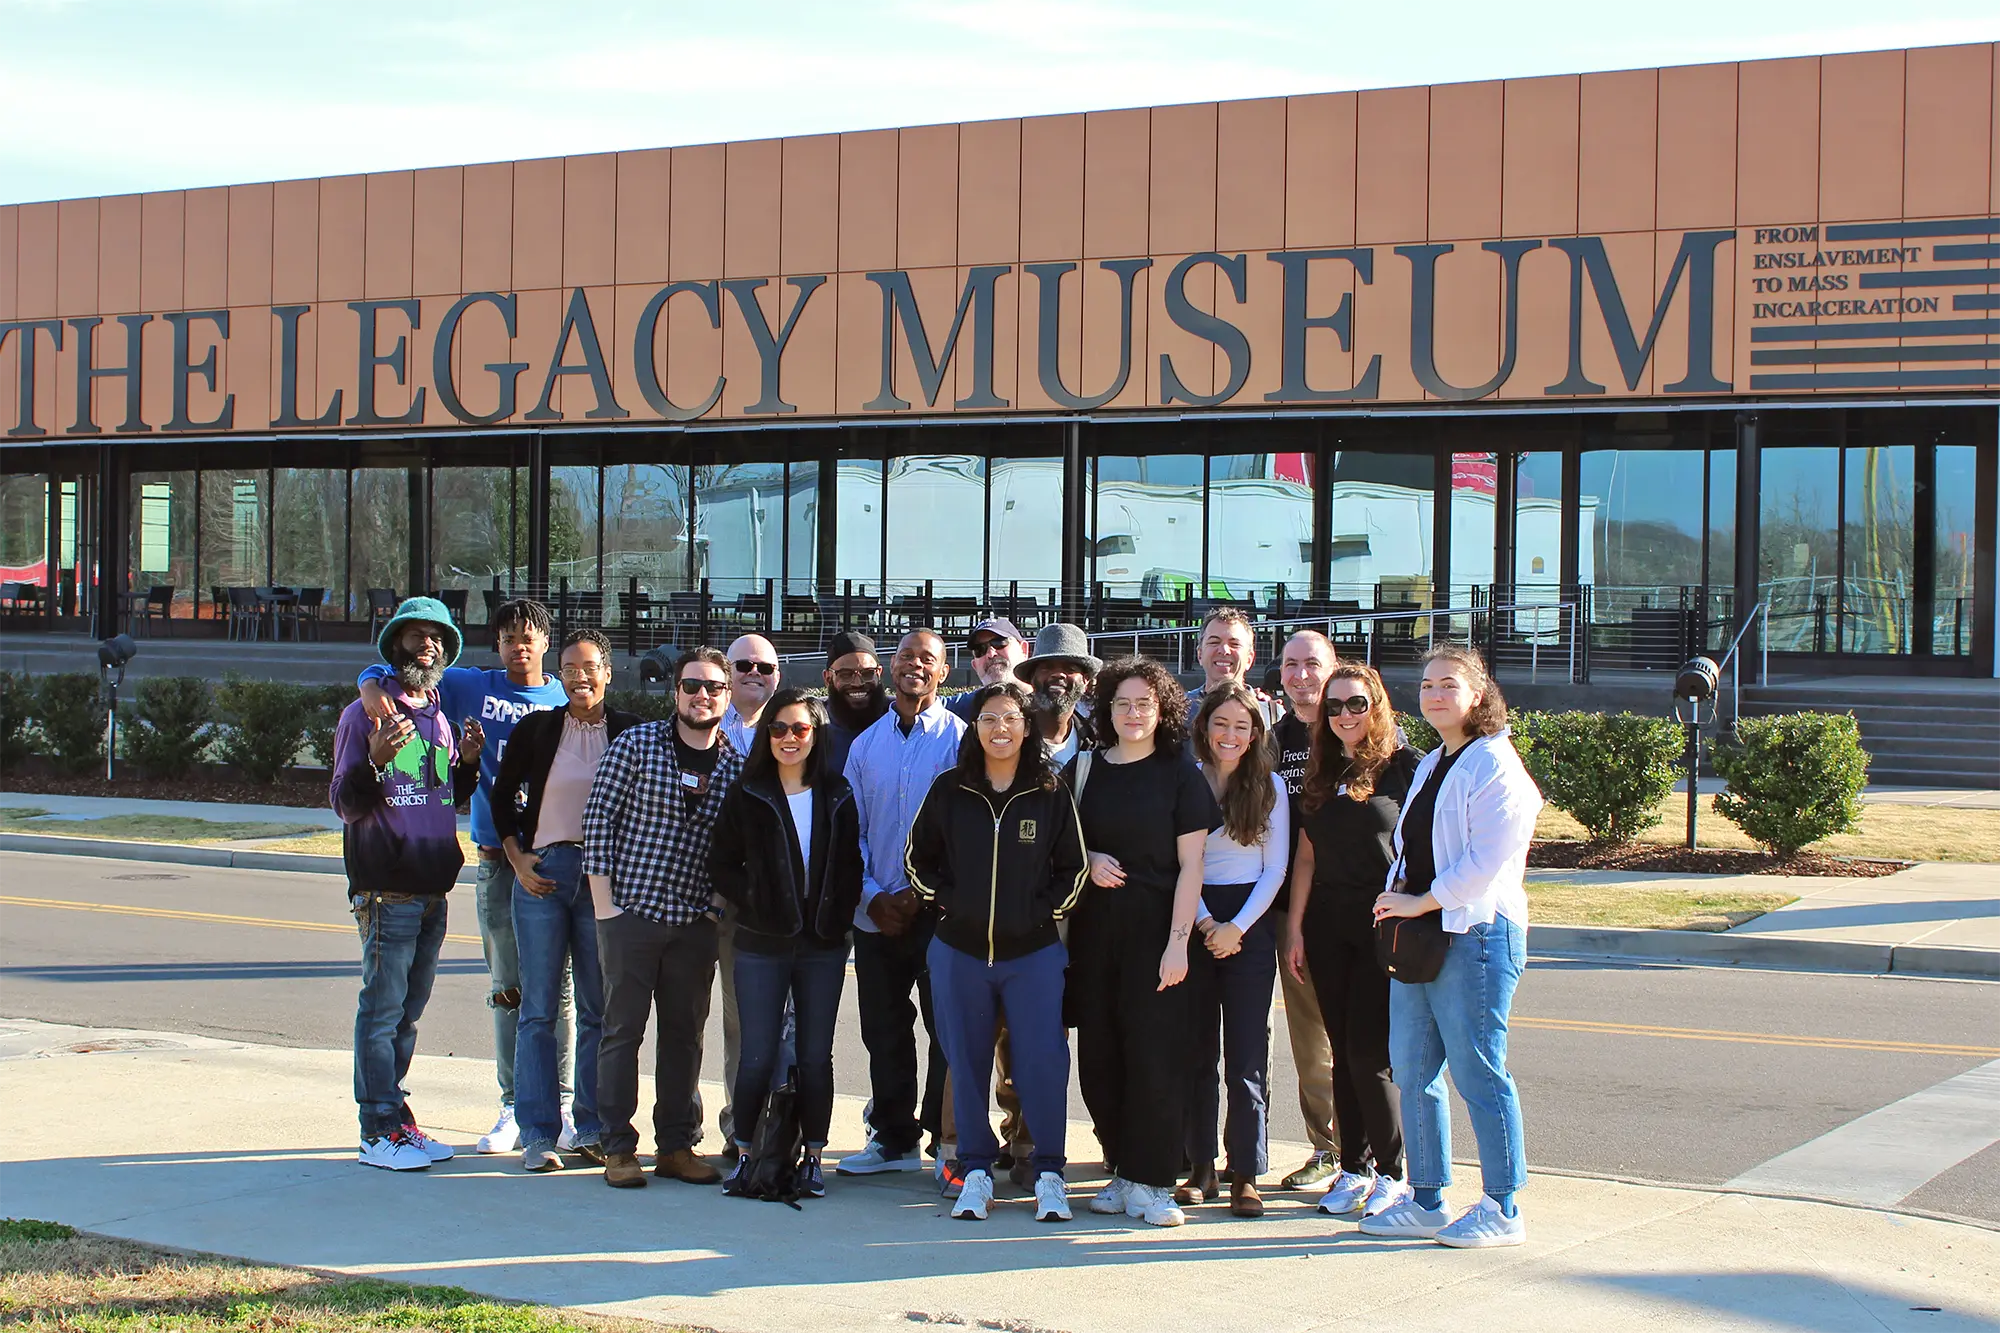 The Freedom Reads team all gathered together in front of The Legacy Museum in Montgomery, Alabama. The museum signage has a smaller subtitle to the right, reading “From Enslavement to Mass Incarceration.”